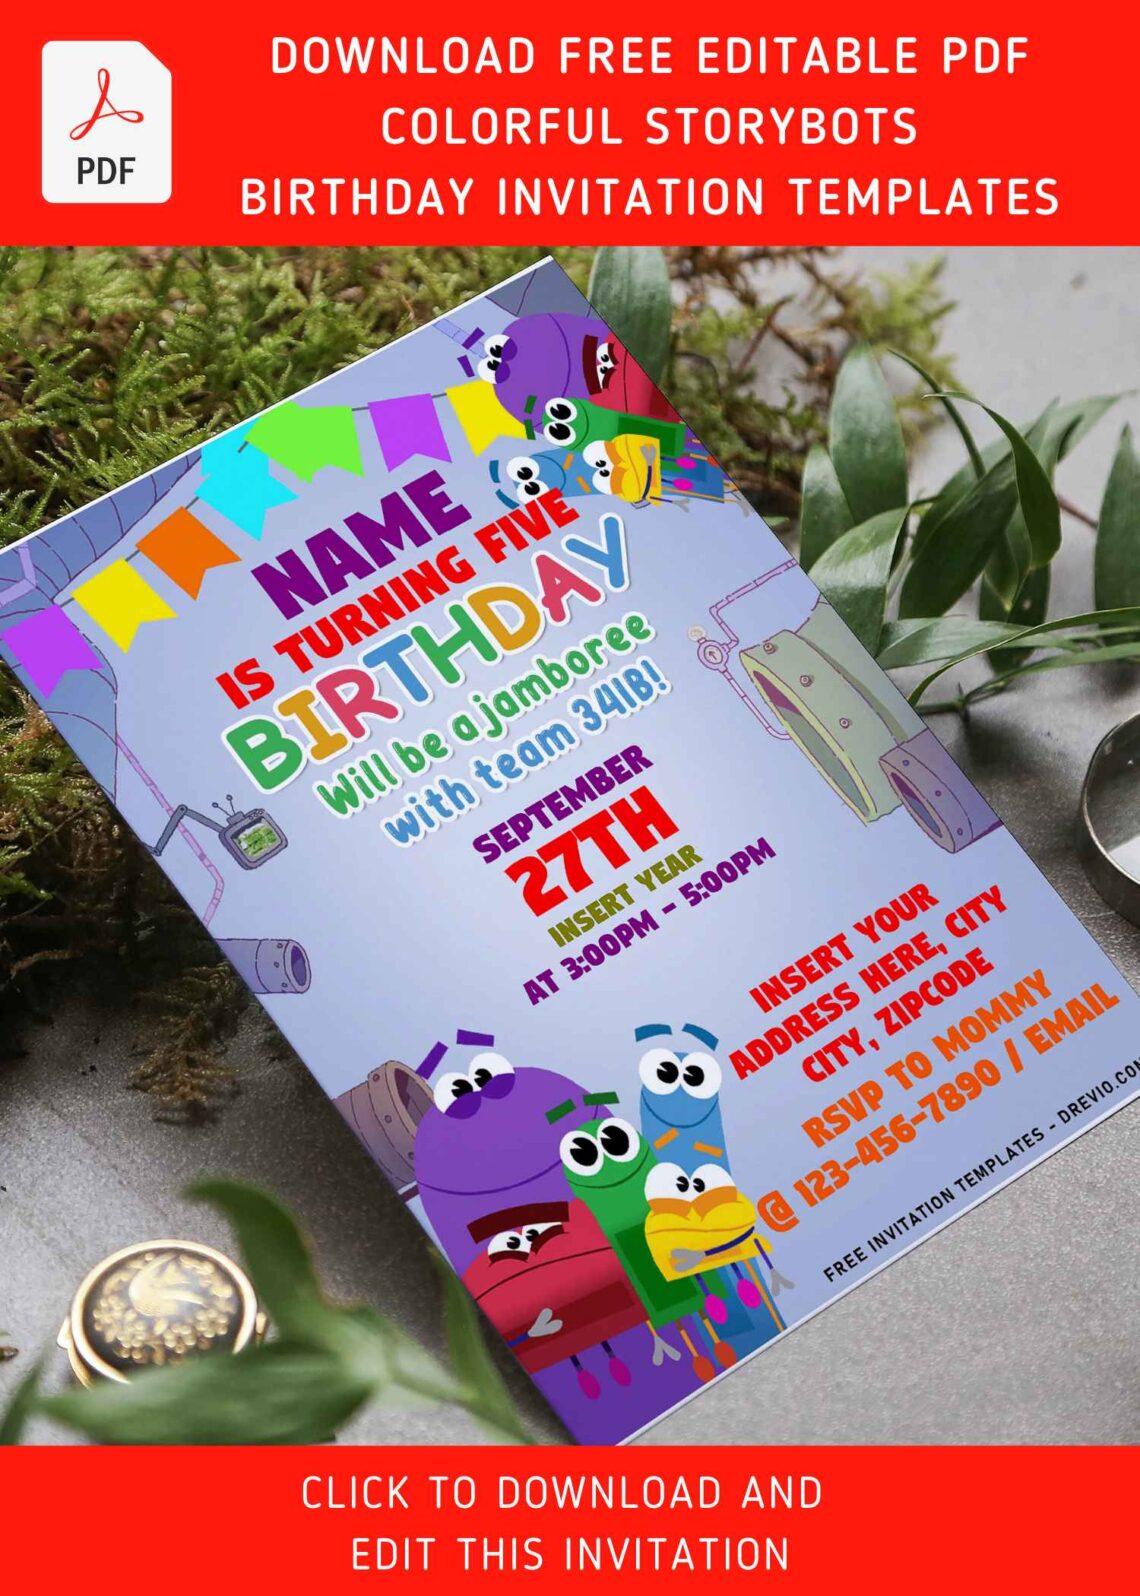 (Free Editable PDF) Friendly And Funny StoryBots Birthday Invitation Templates with editable text